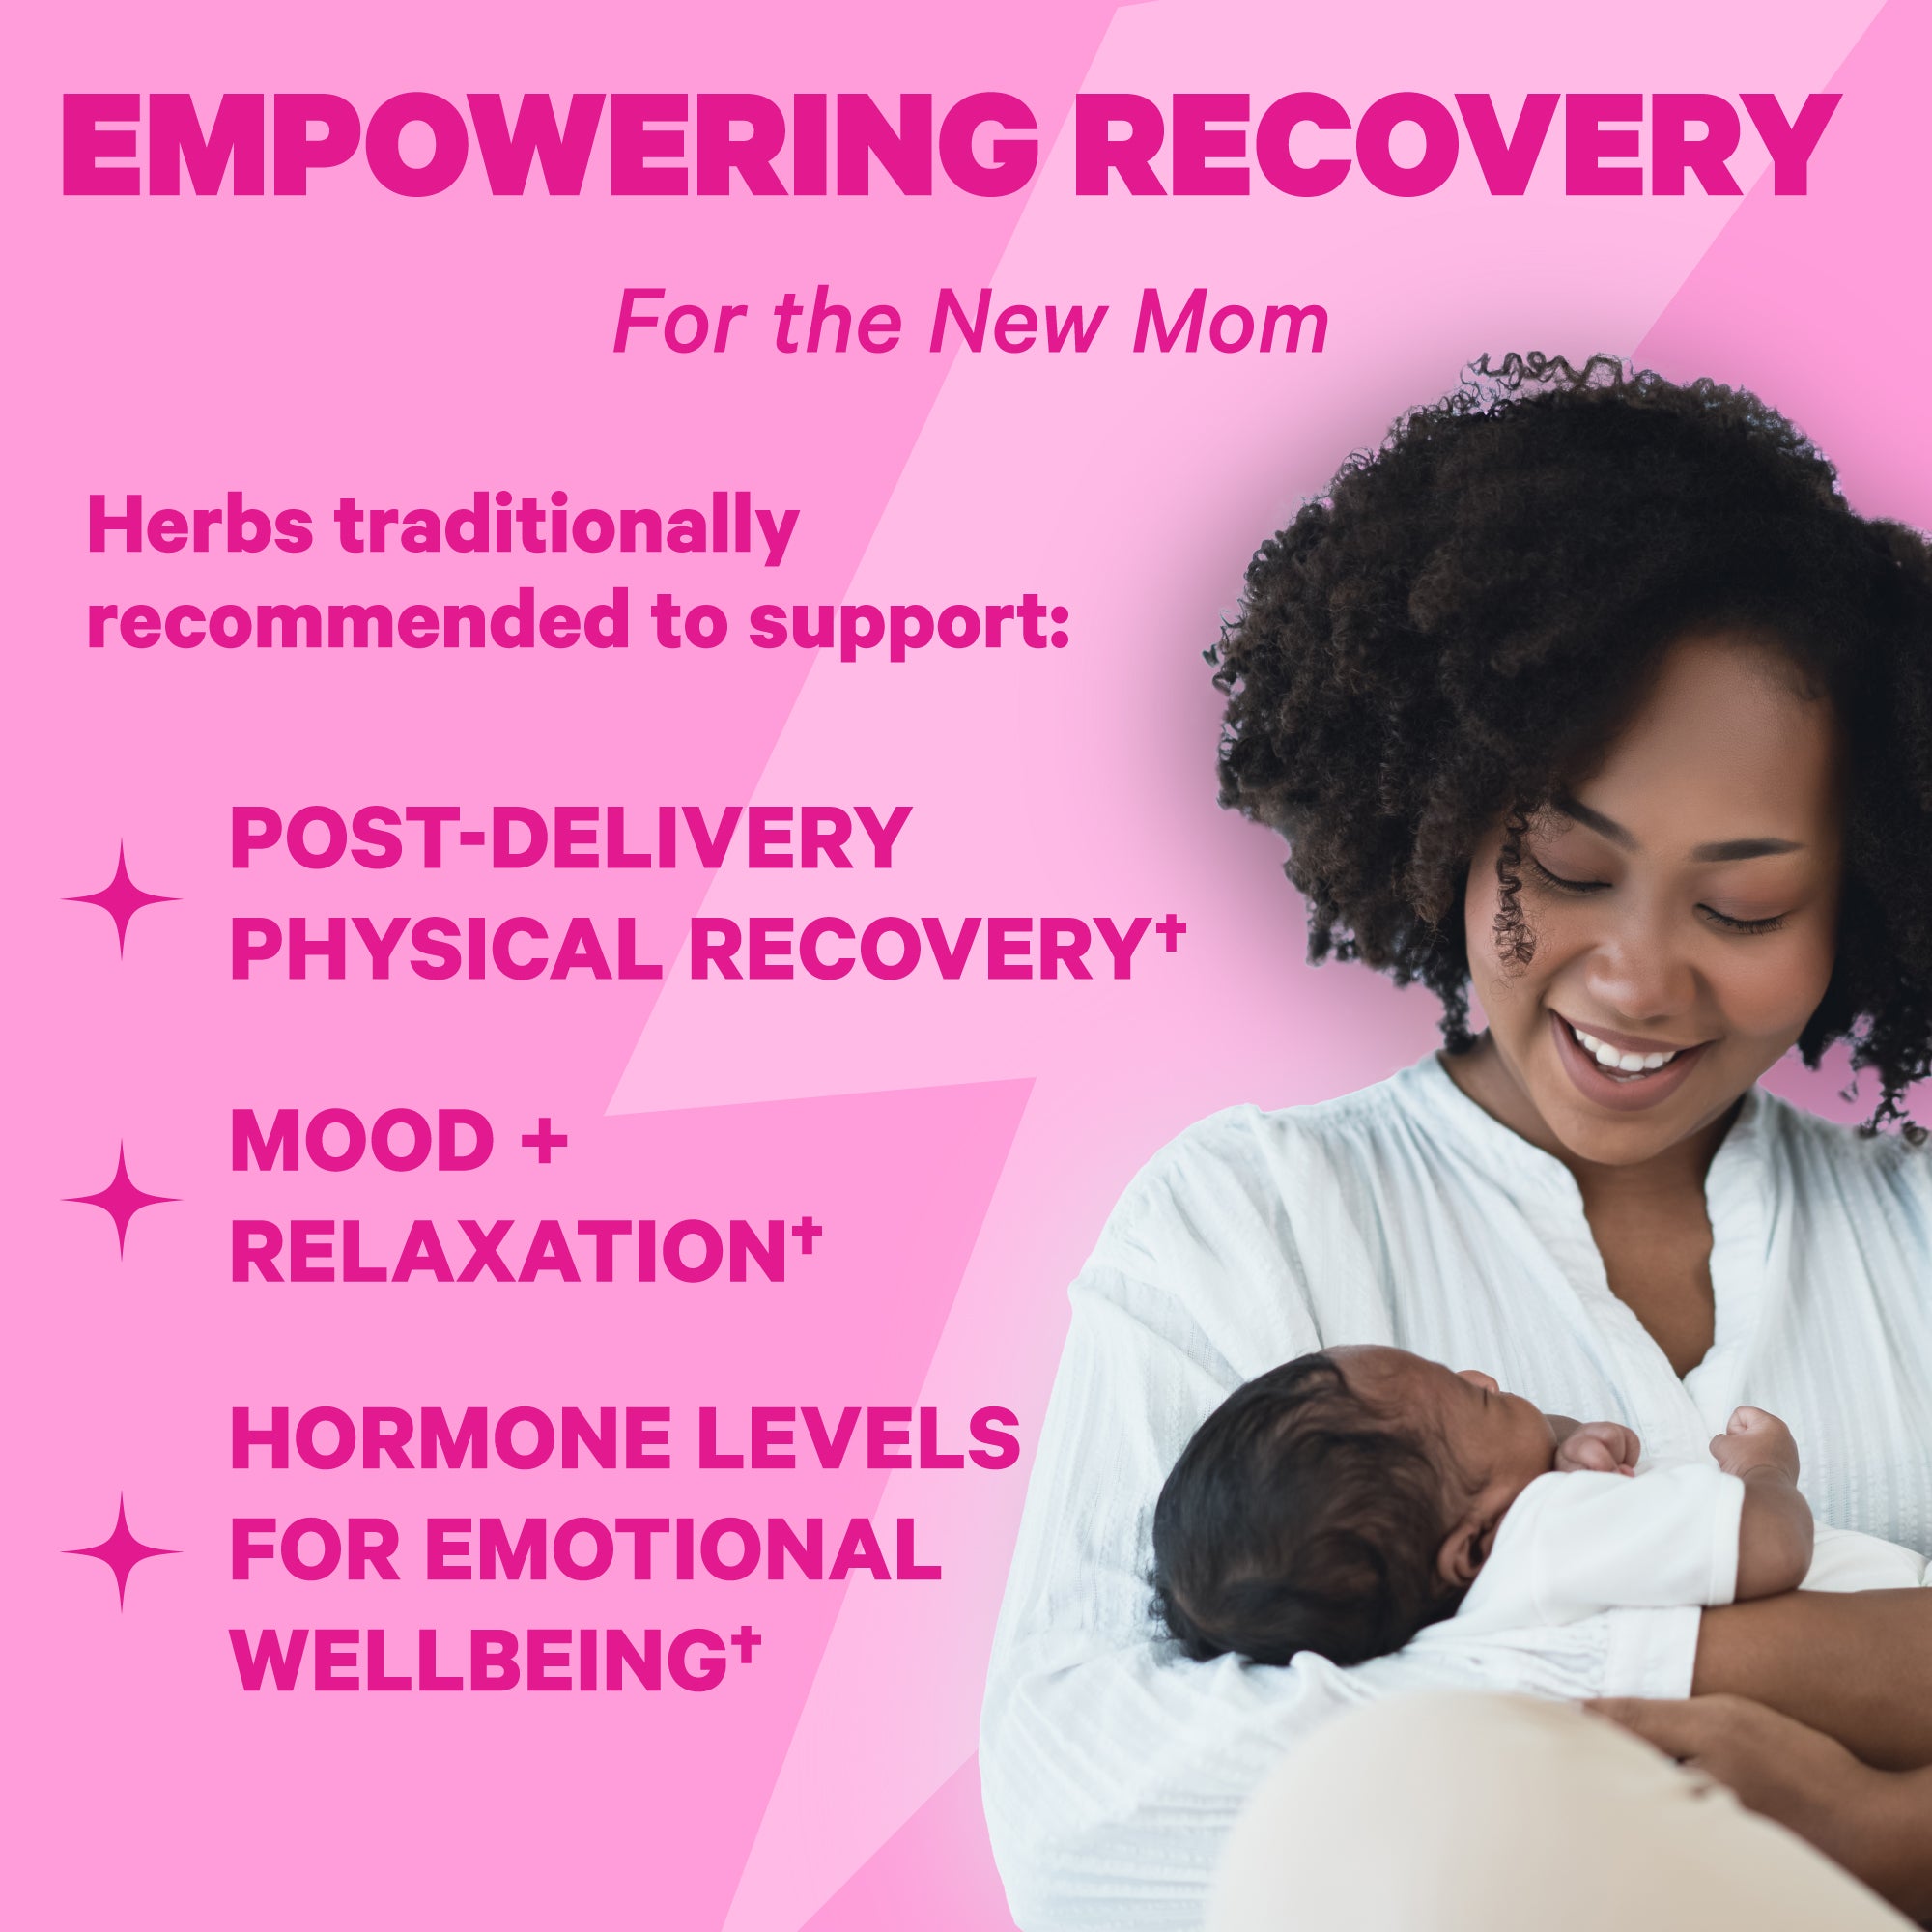 Pink Stork Postpartum Recovery Herbal Tea, Organic Red Raspberry Leaf with  Chamomile, Hormone Balance for Women after Labor and Delivery, Strawberry